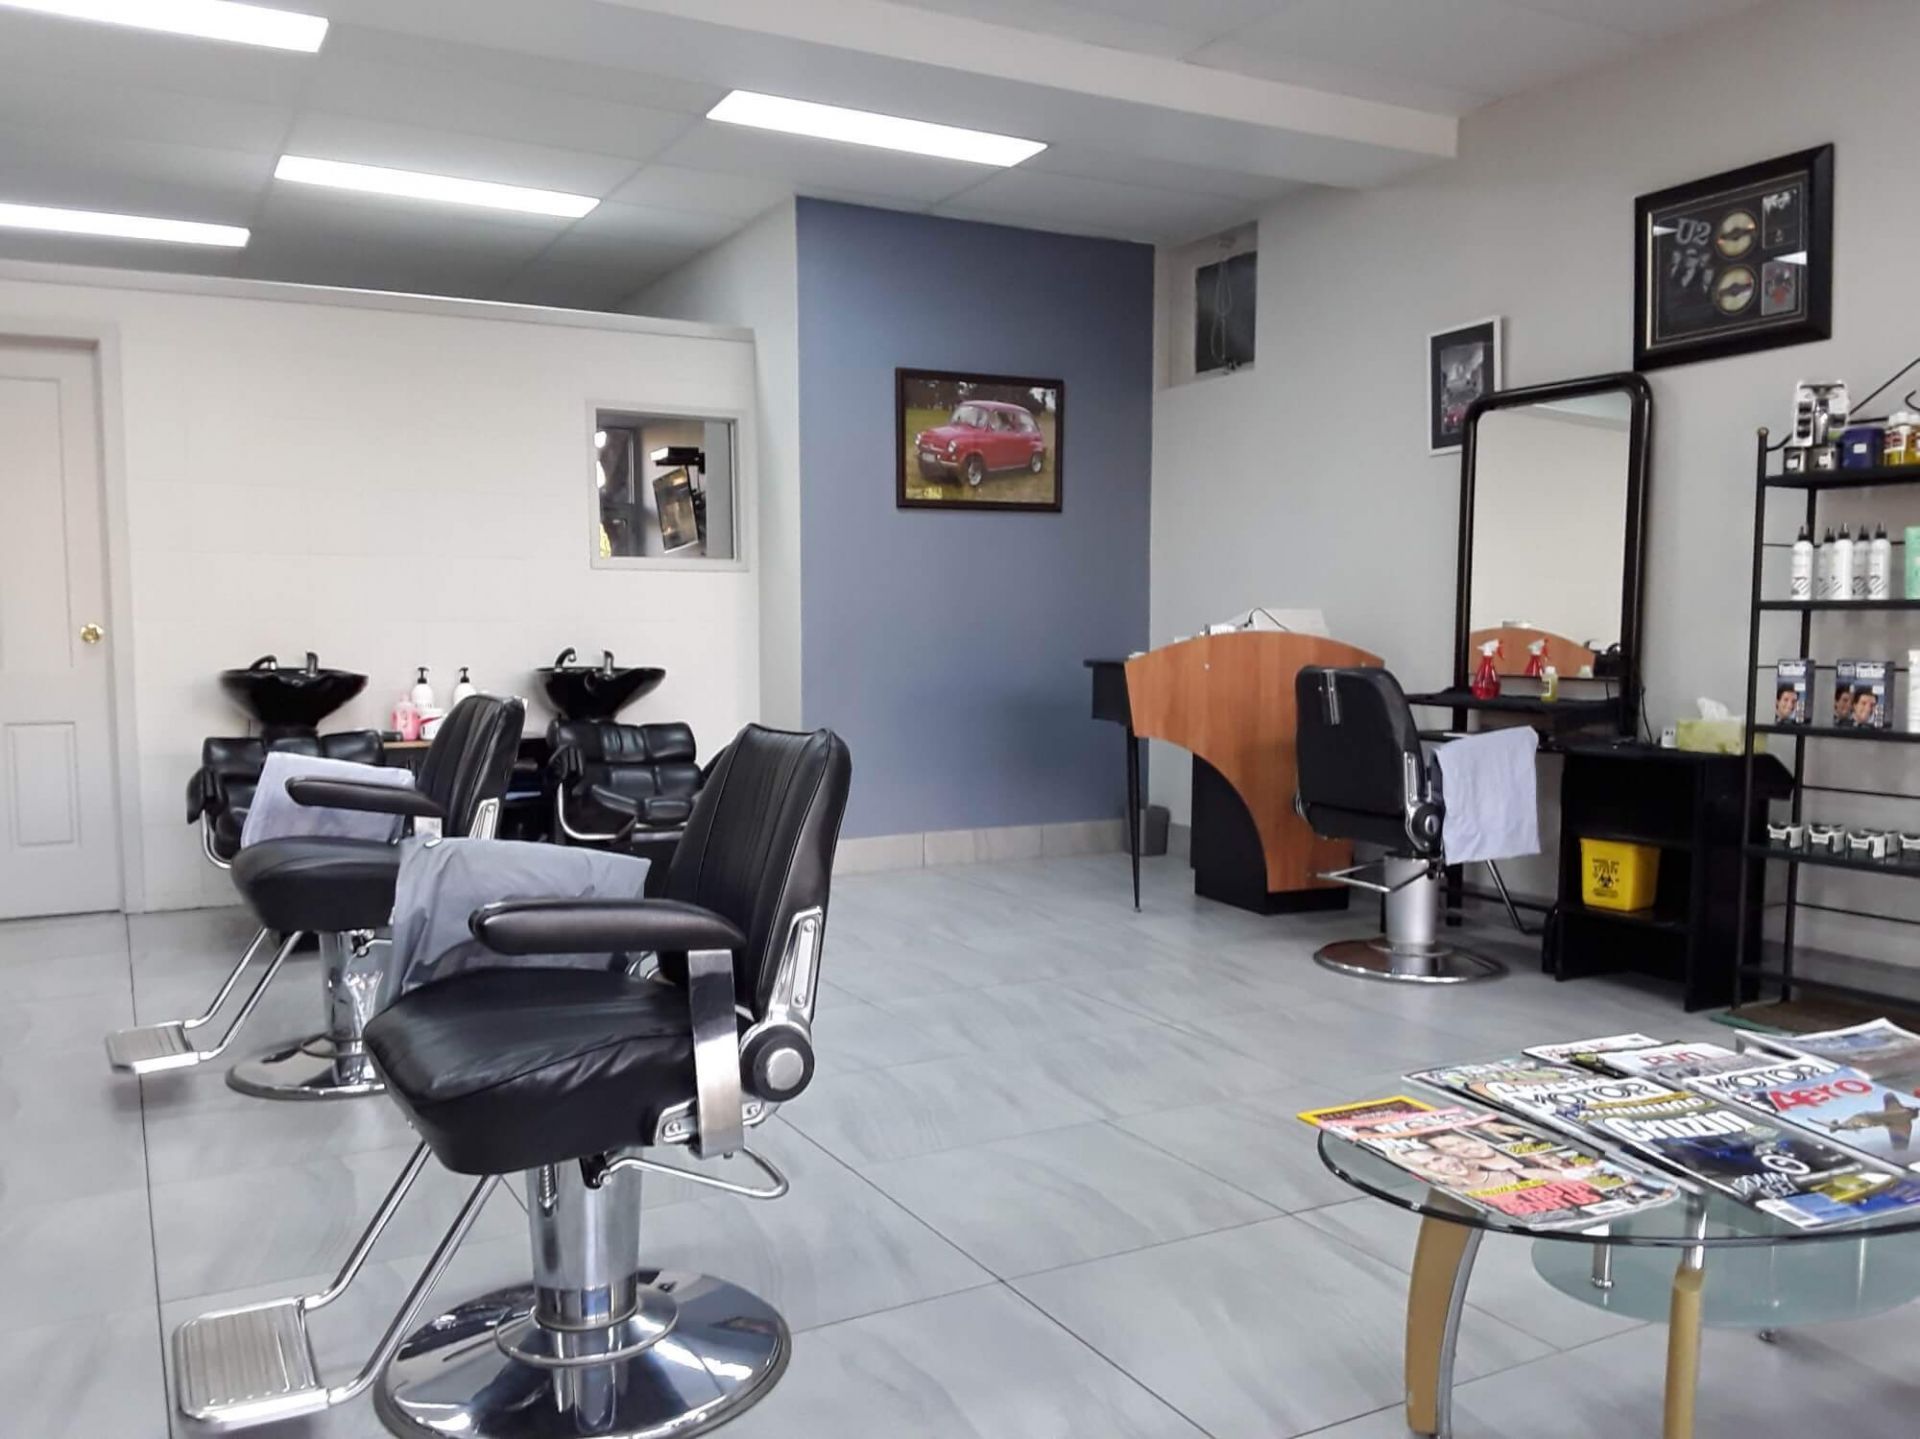 RENOVATED BARBER SHOP FOR SALE SELLING WELL UNDER VALUE